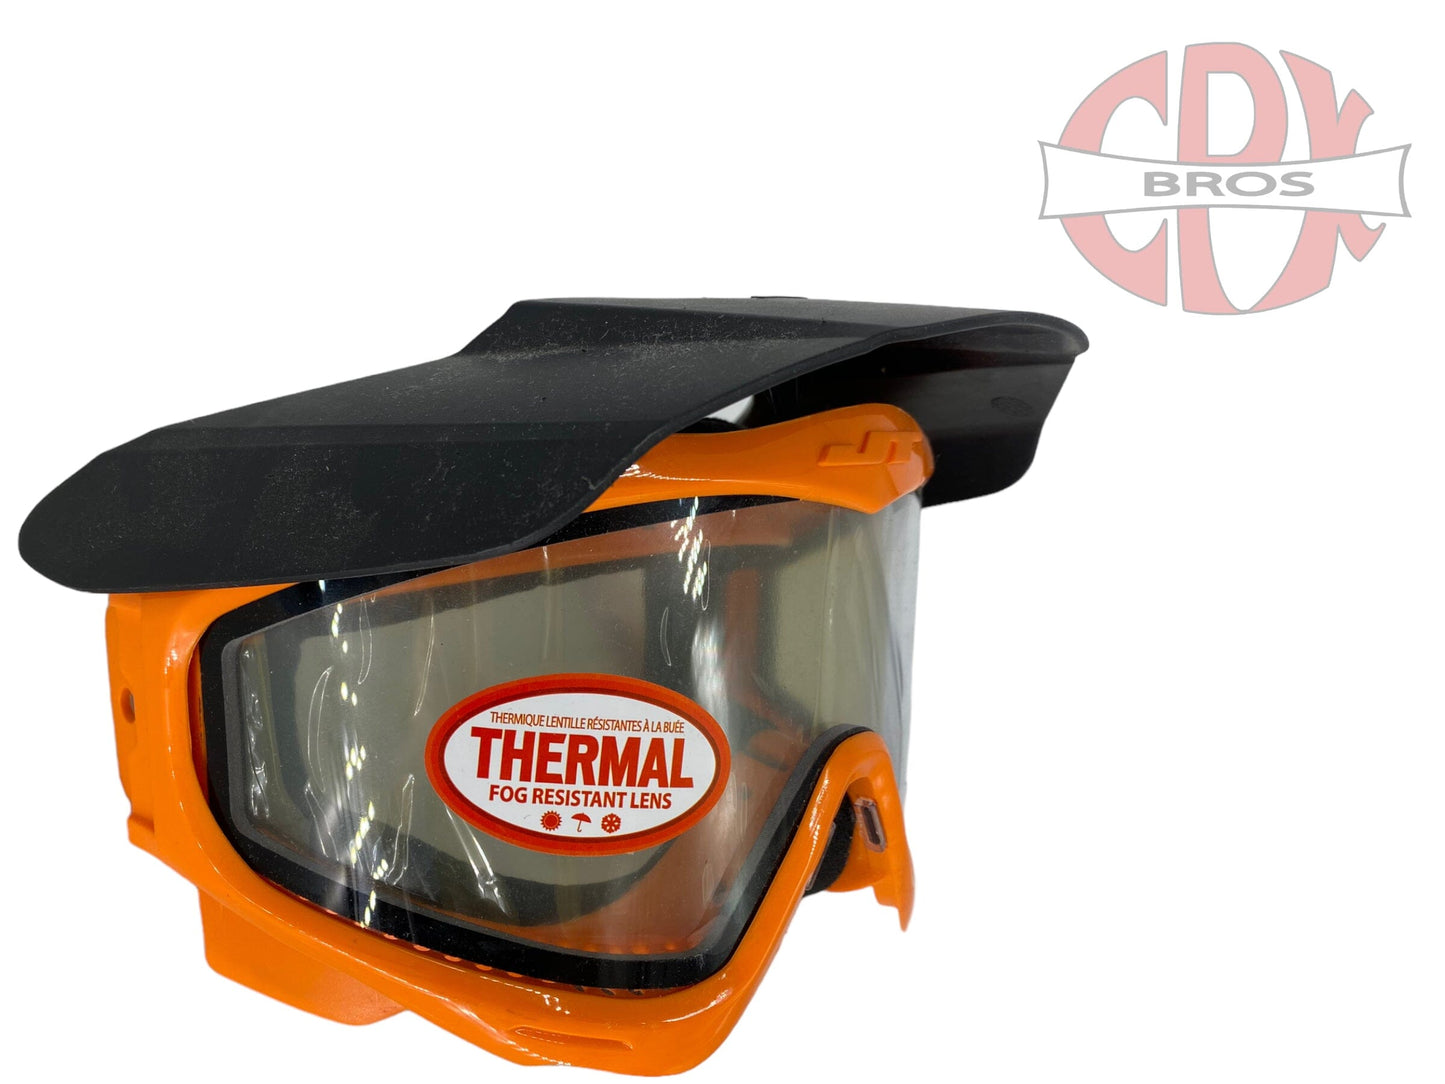 Used New JT Paintball Thermal Goggle Mask Lens Orange Frames, Visor, Lens Paintball Gun from CPXBrosPaintball Buy/Sell/Trade Paintball Markers, Paintball Hoppers, Paintball Masks, and Hormesis Headbands